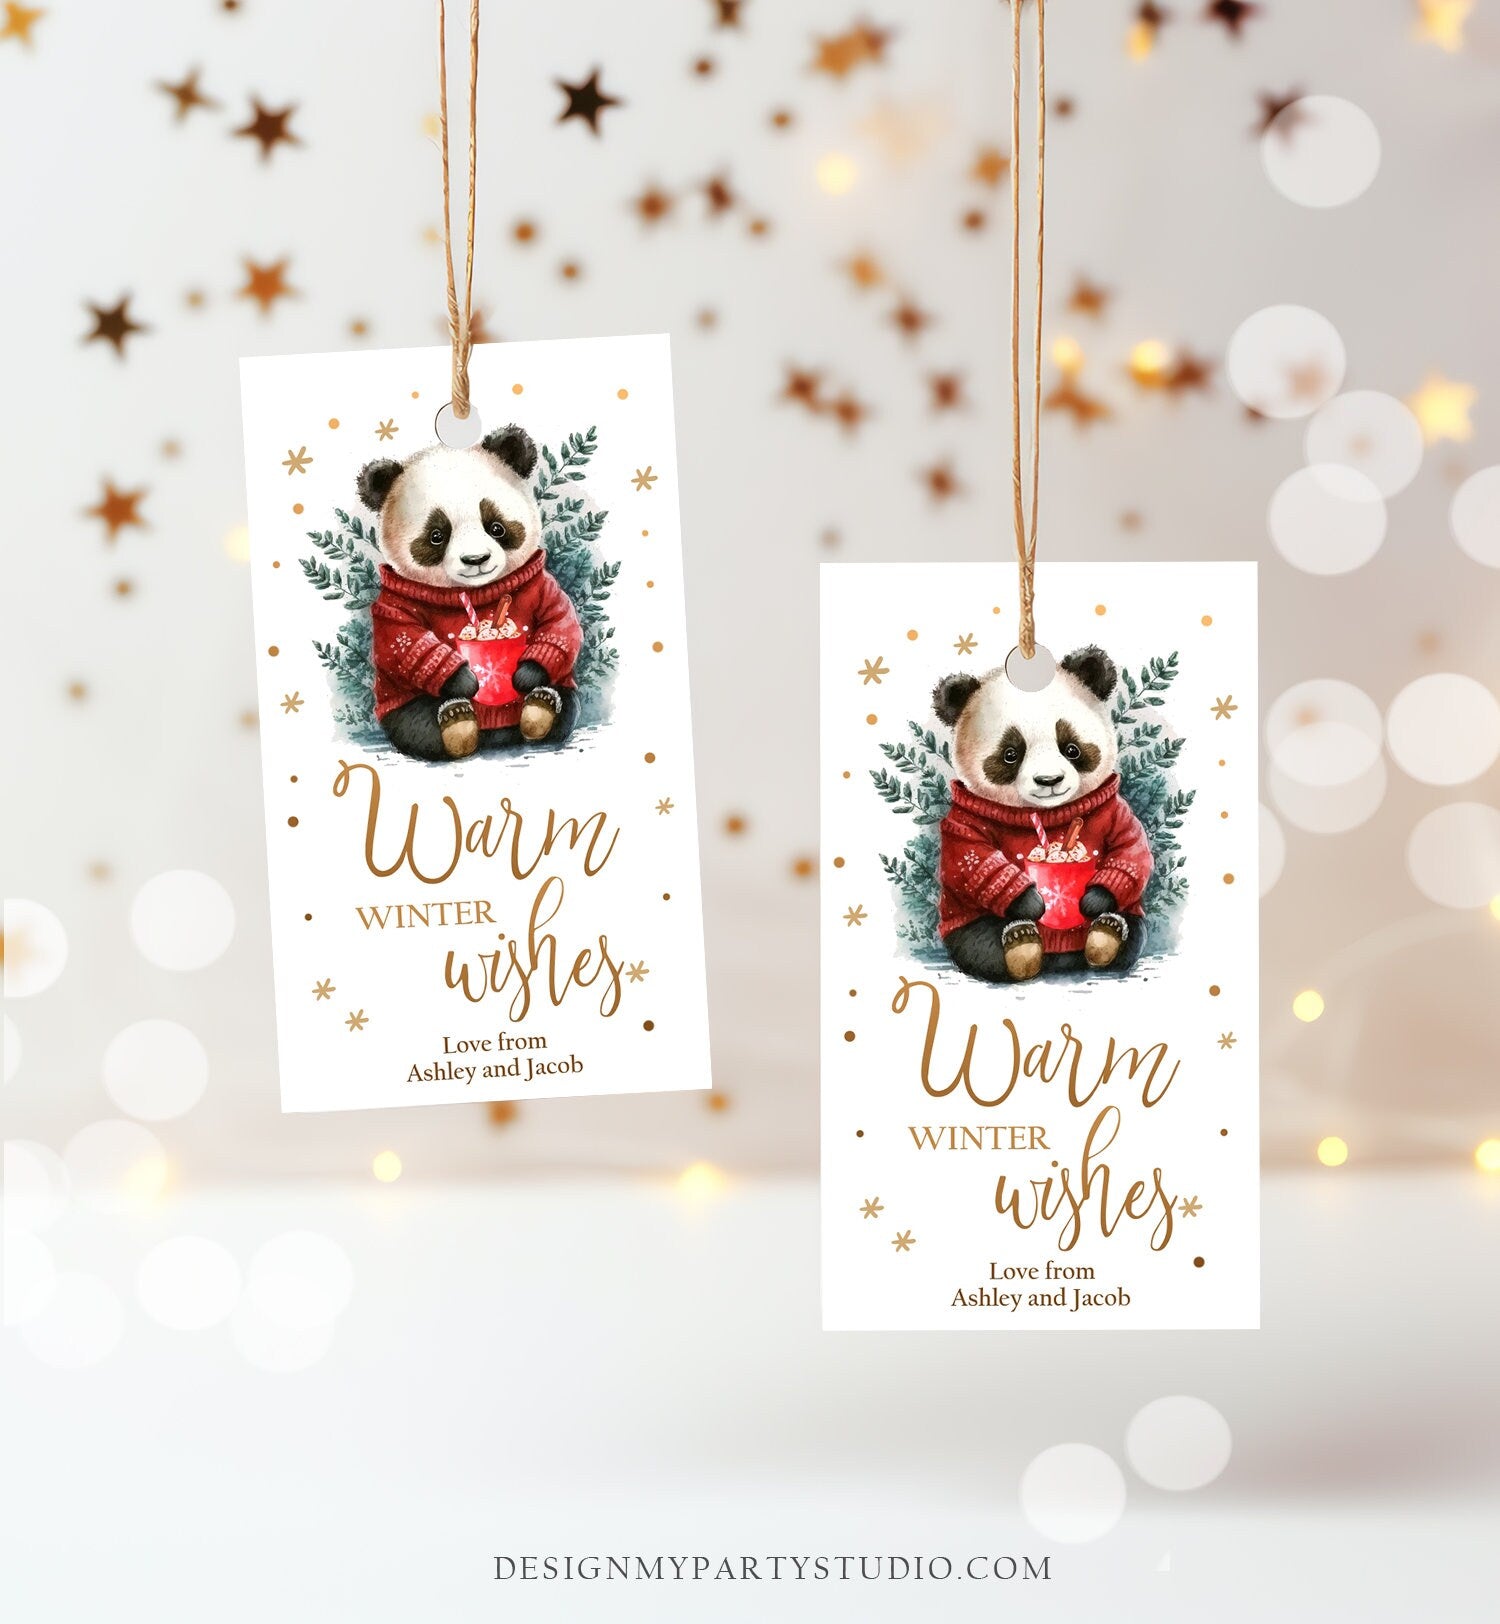 Editable Warm Wishes Tag Personalized Christmas Tag Hot Cocoa Tag Holiday Gift Tag Hot Chocolate Download Printable Template Corjl 044300353